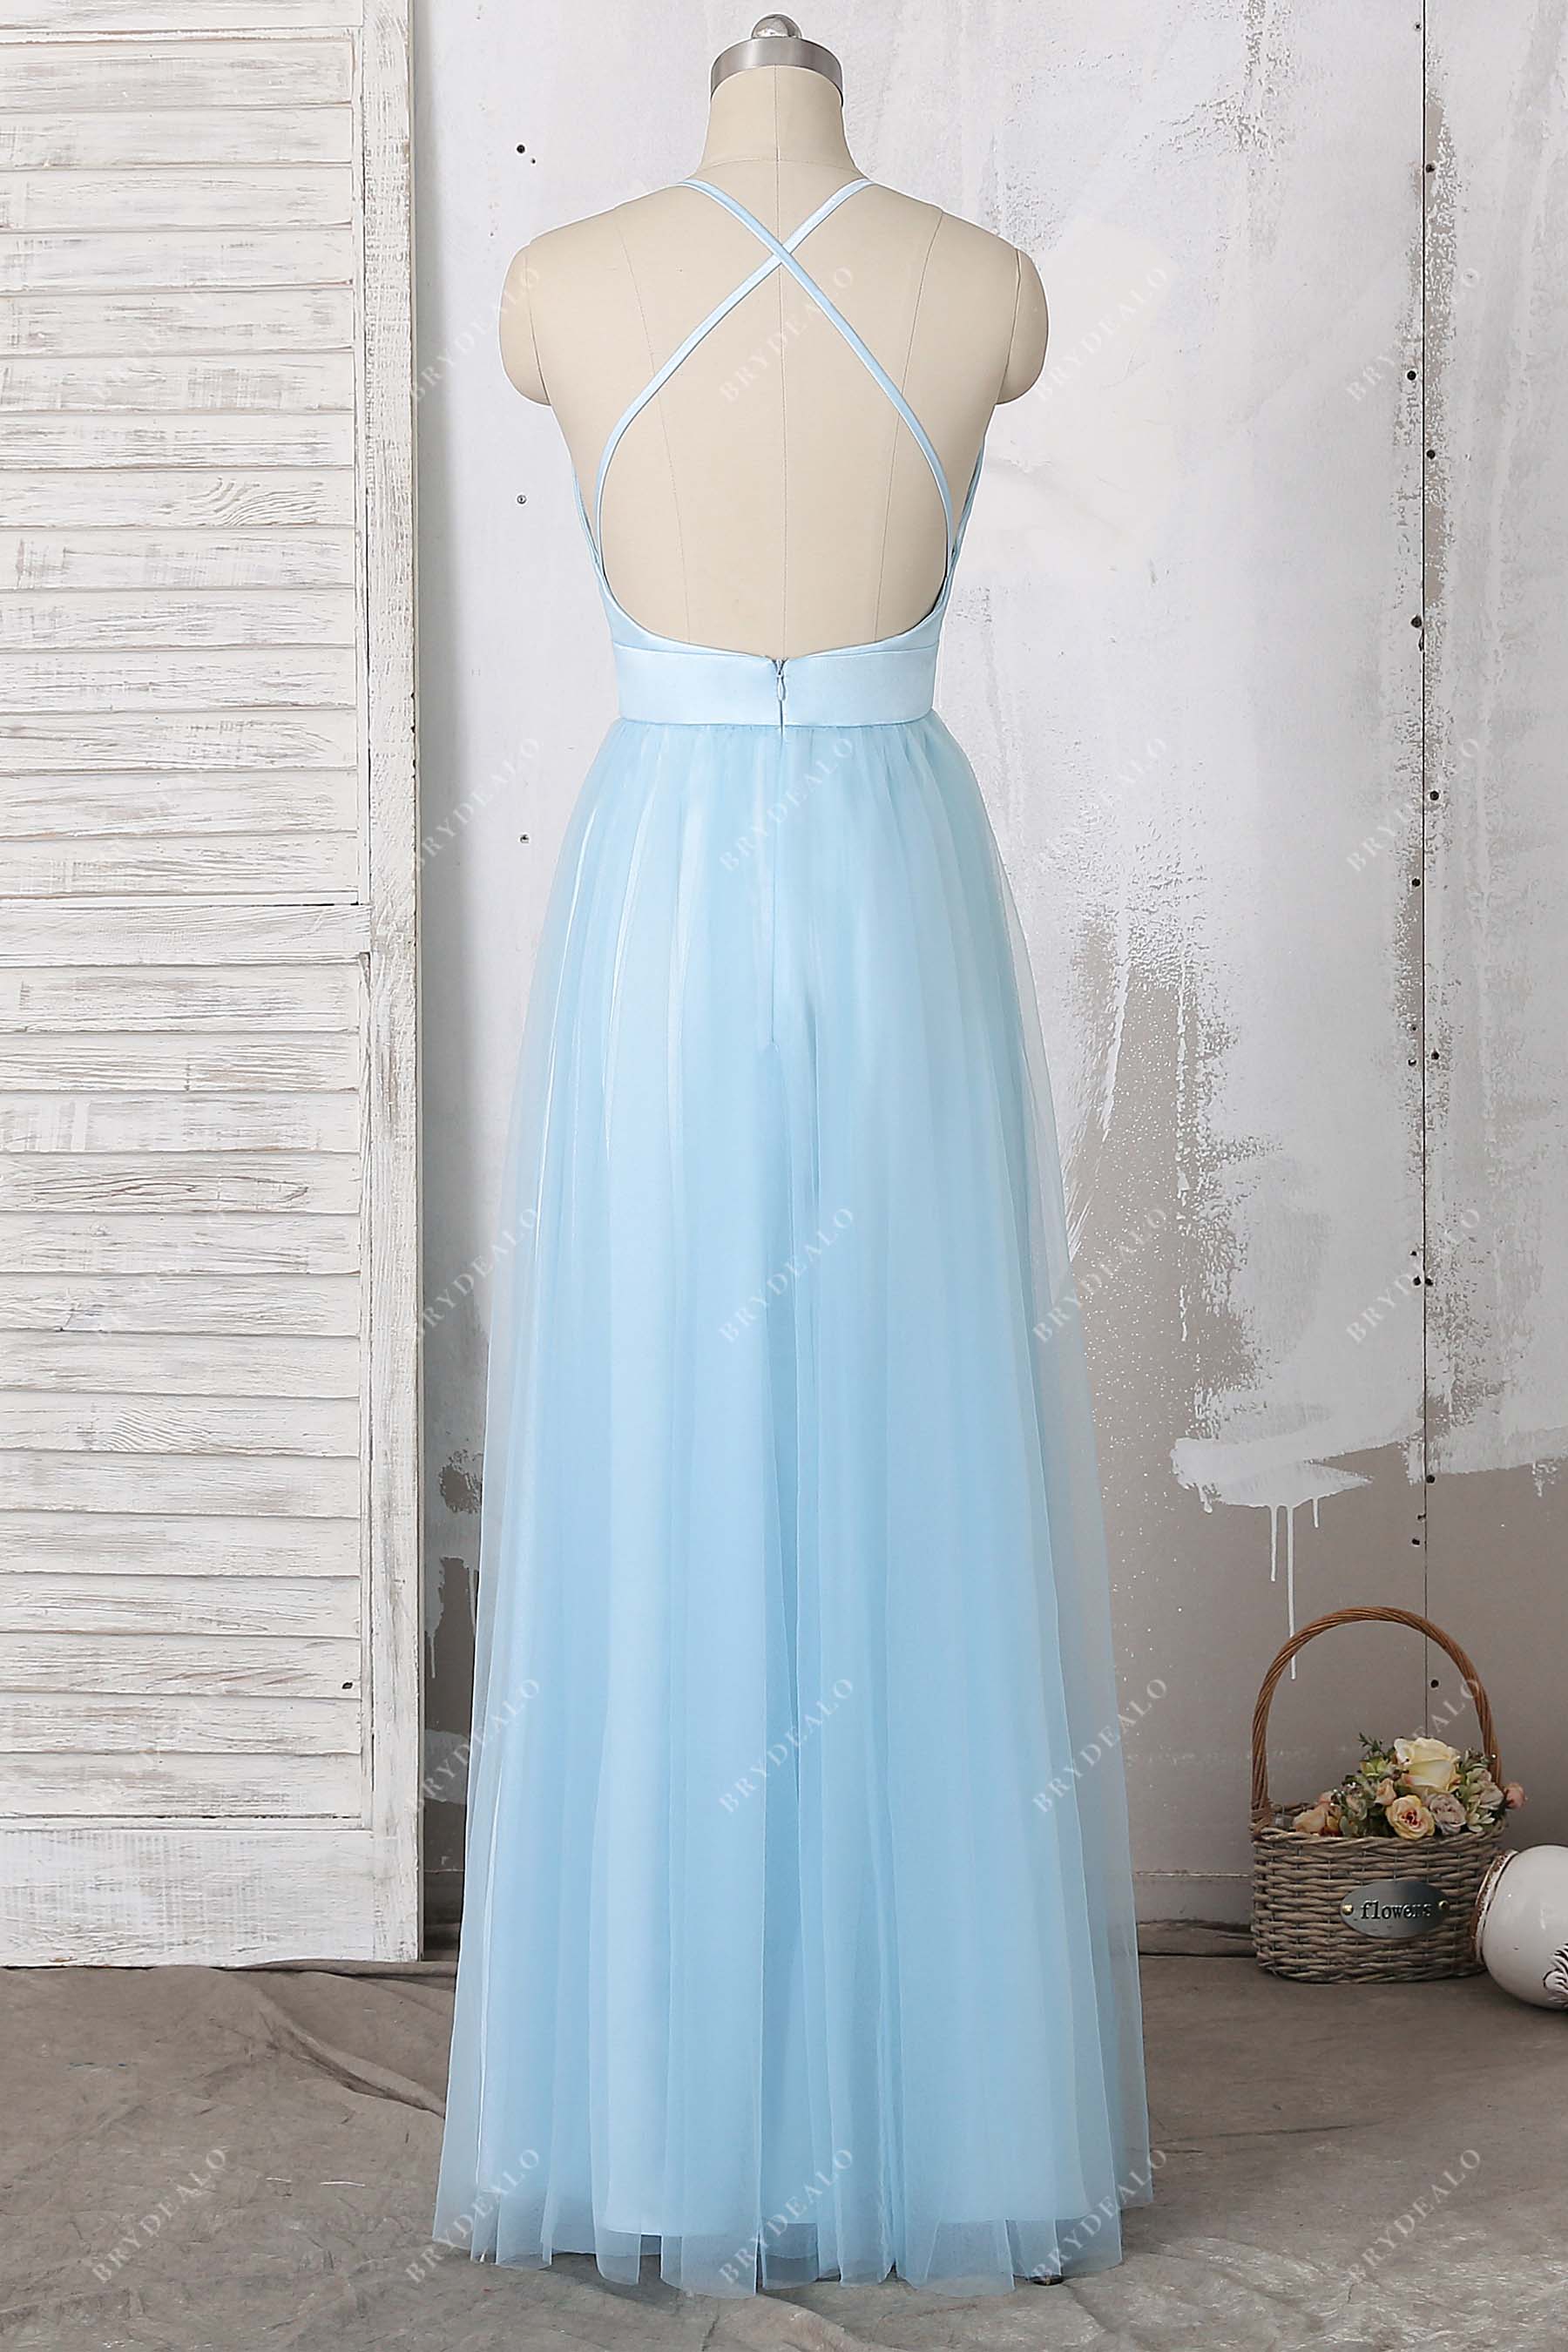 Light Blue Spaghetti Straps Tulle Tiered Prom Dress Y2743 – Simplepromdress